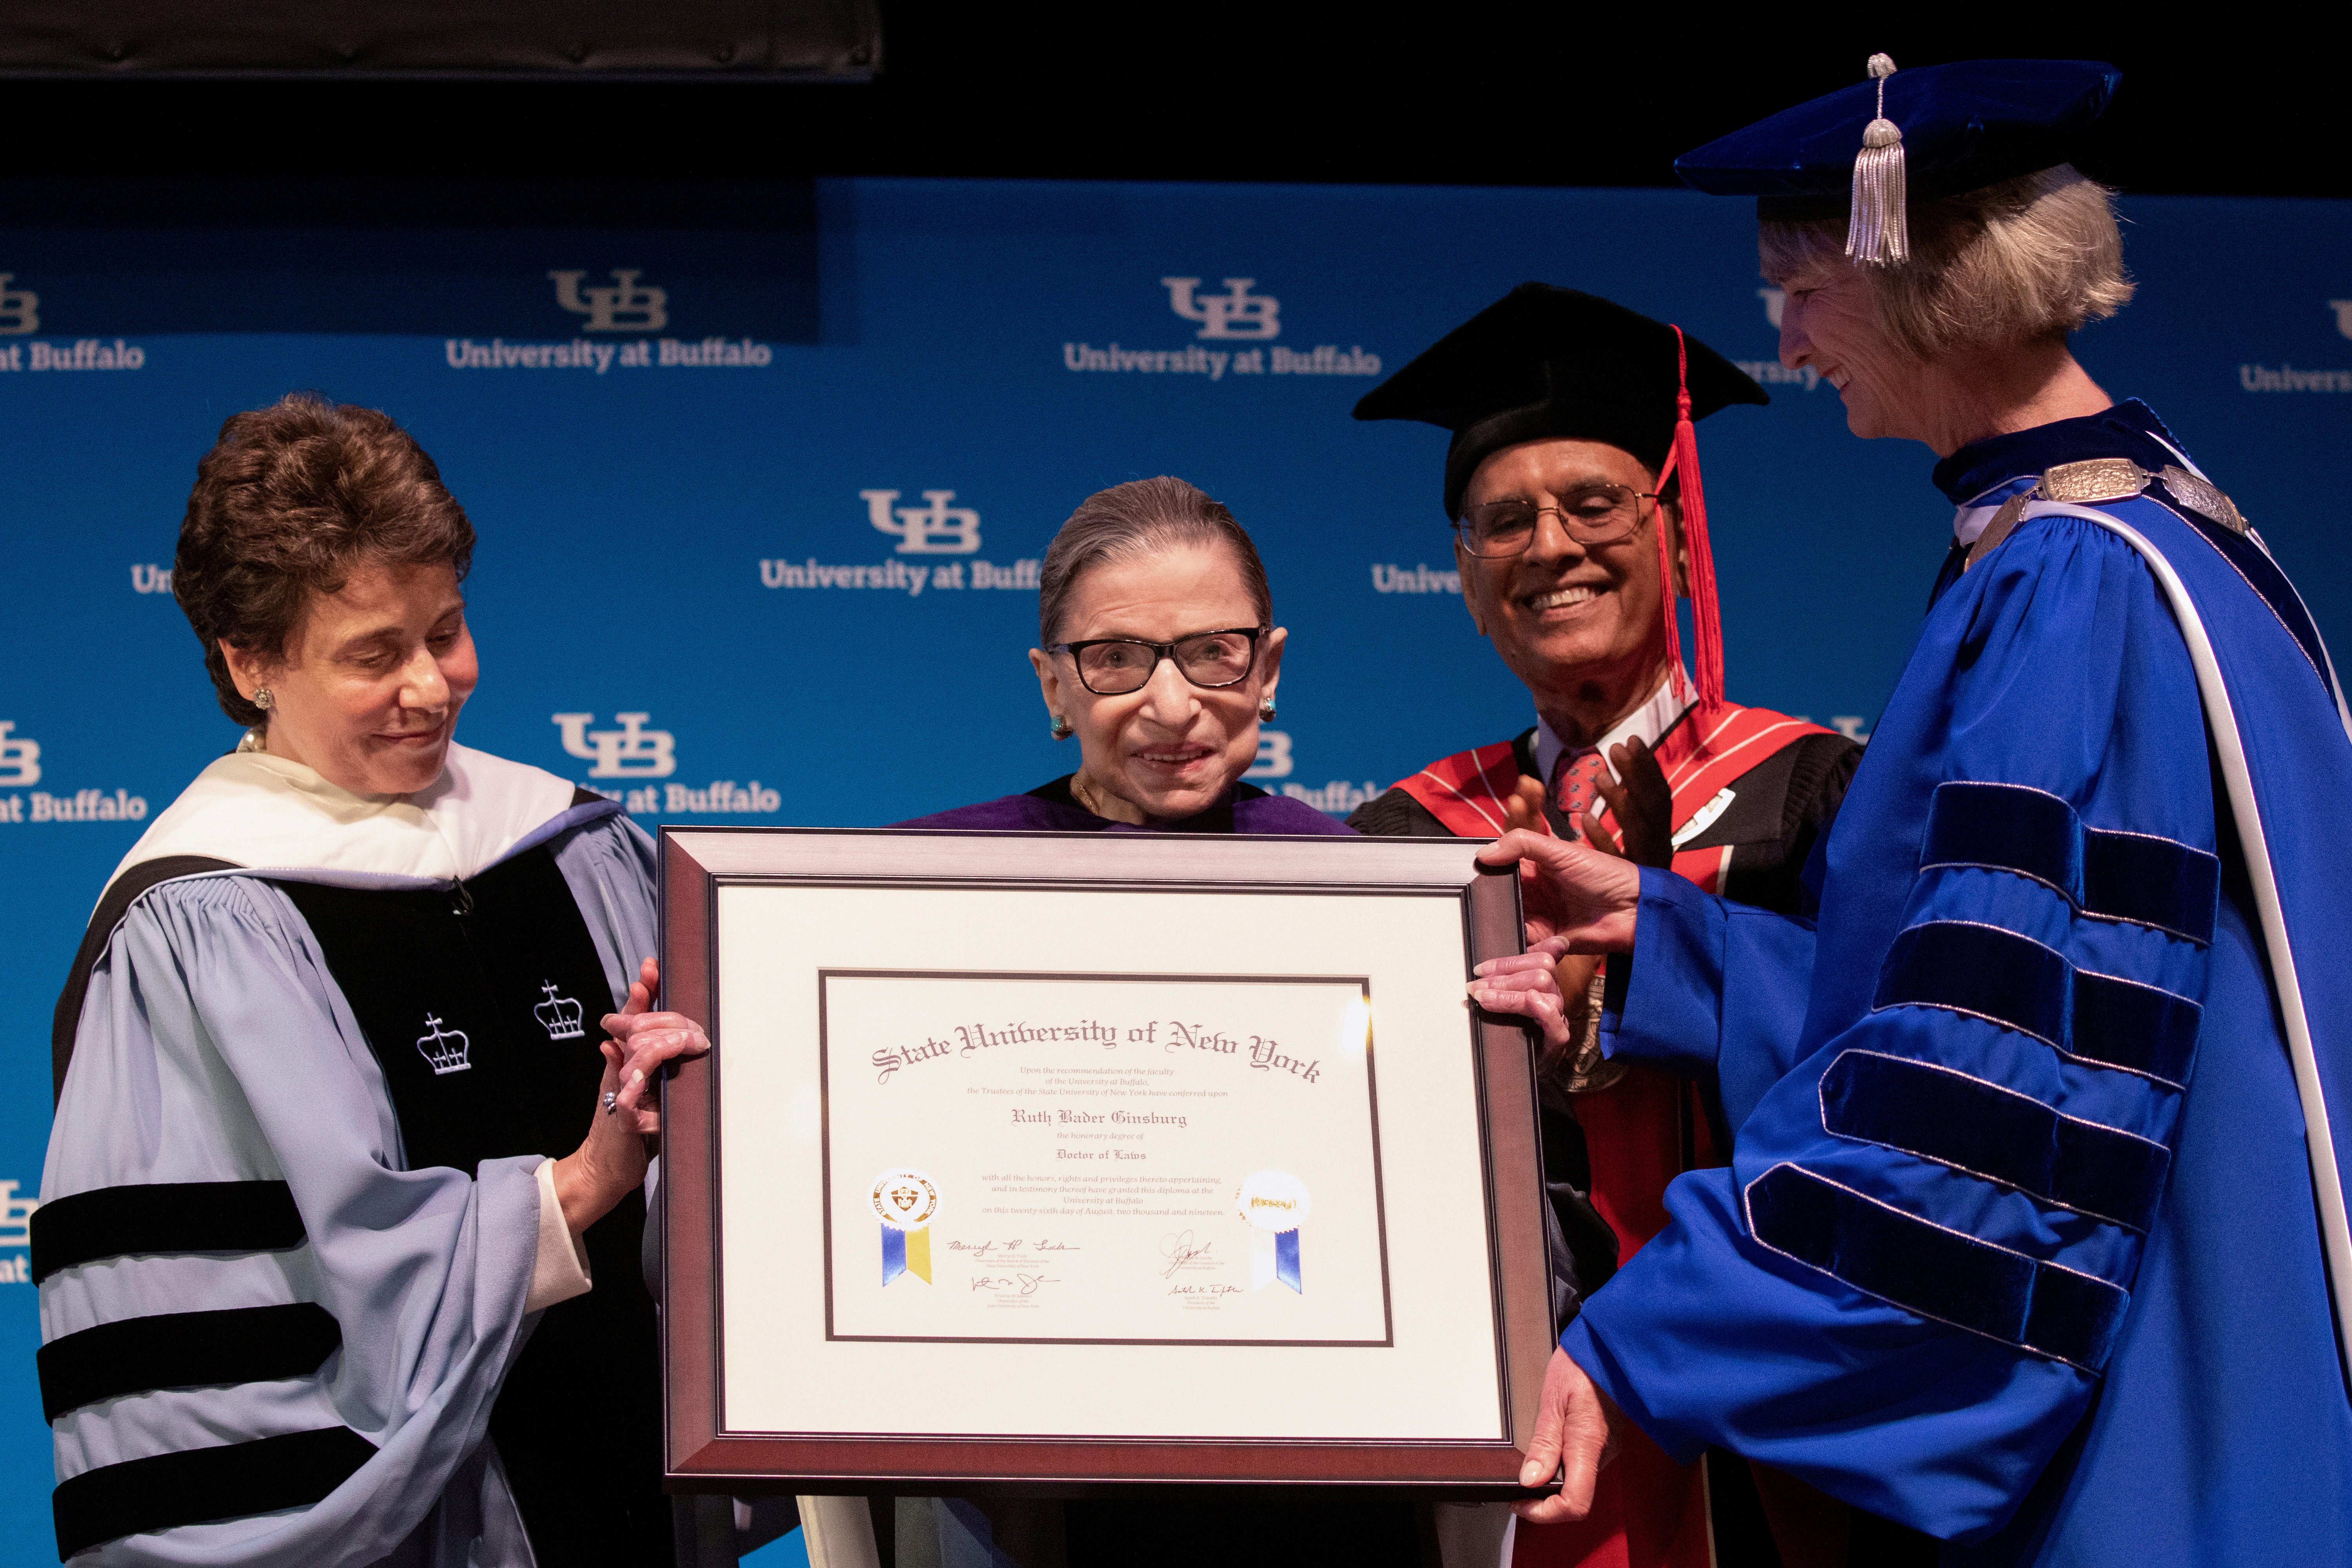 Justice Ruth Bader Ginsburg is presented with an honorary doctoral degree at the University at Buffalo School of Law on August 26, 2019. Reuters/Lindsay DeDario 